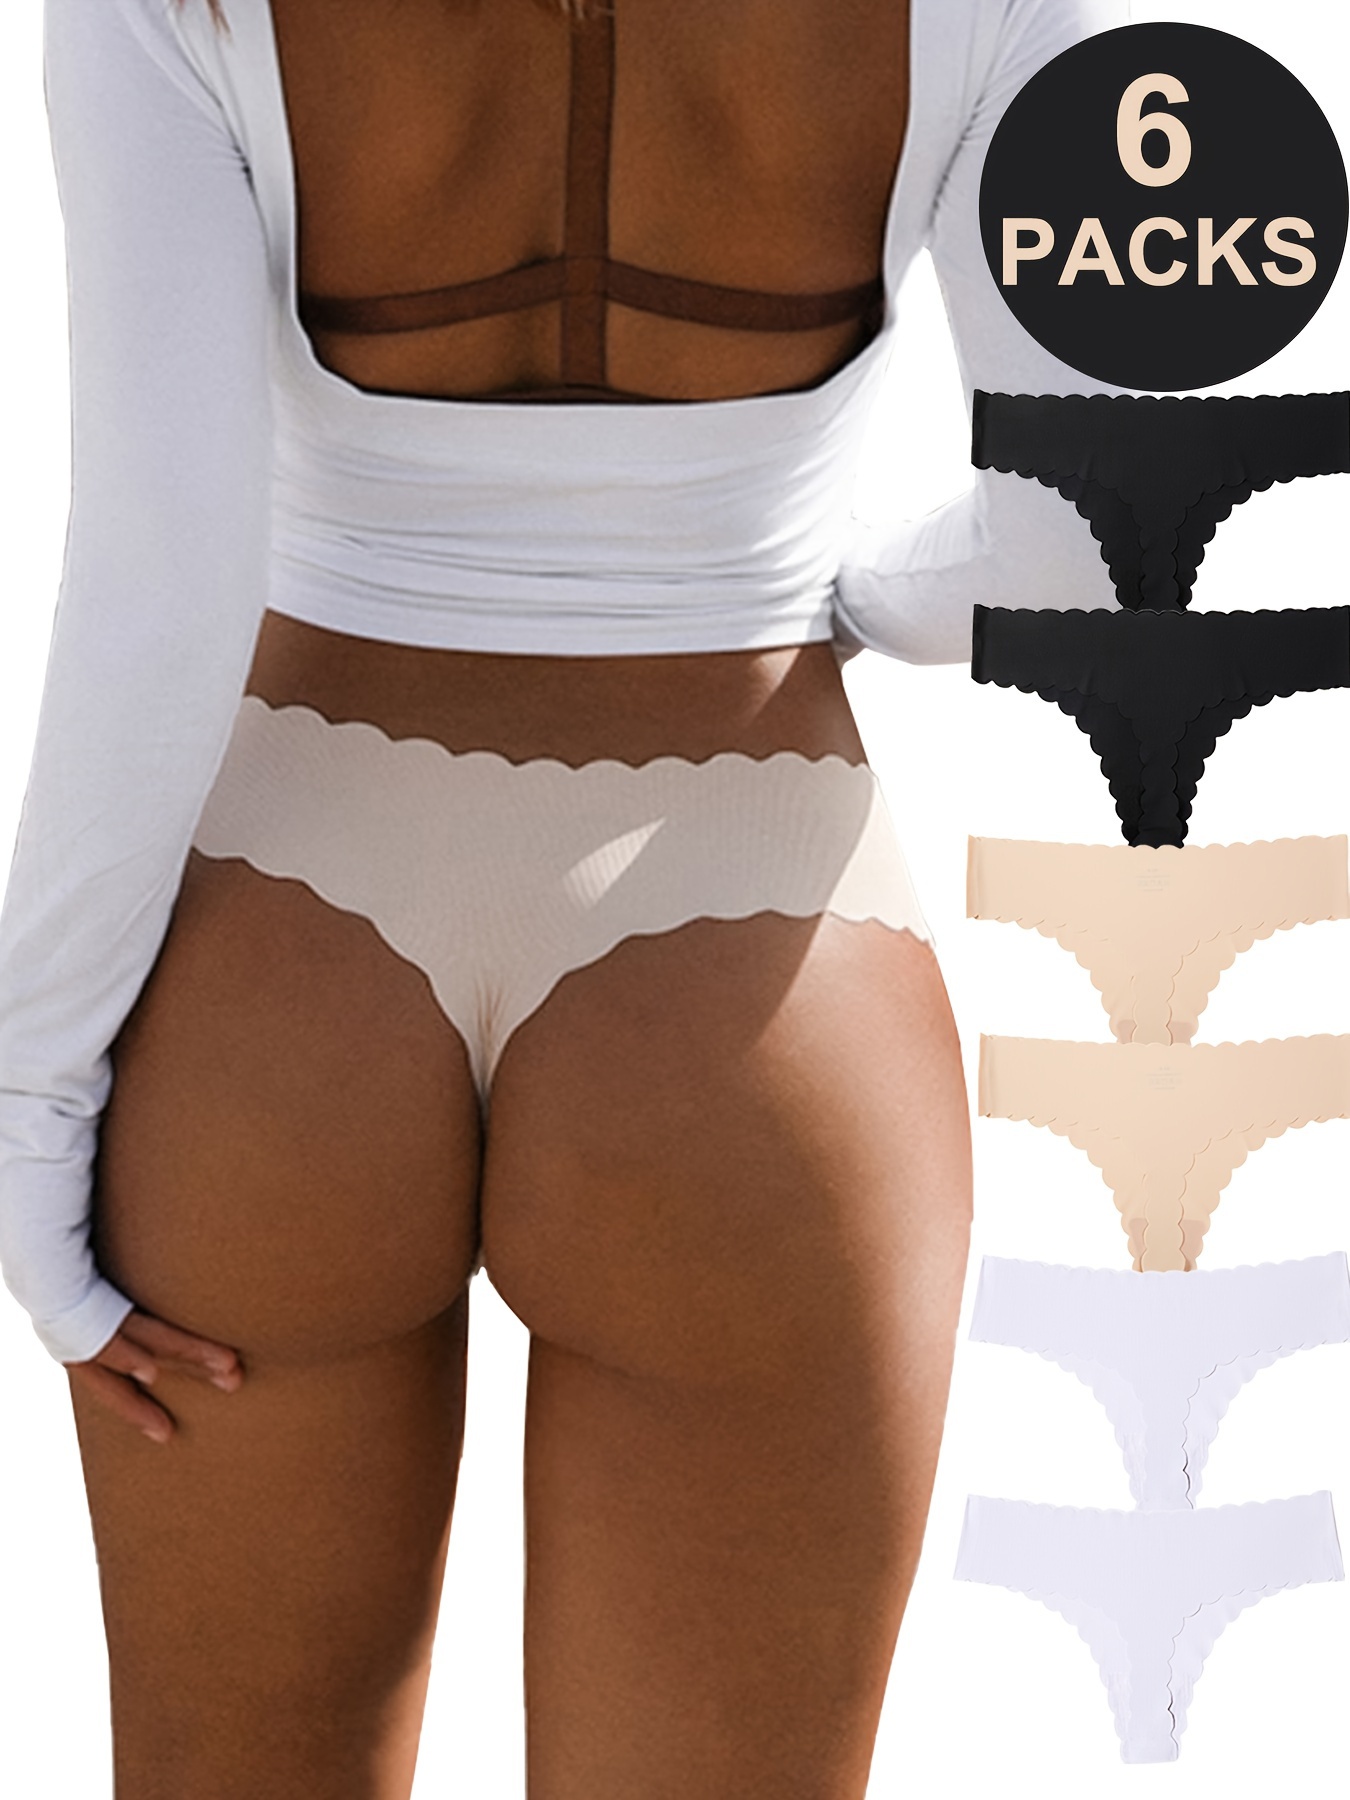 6pcs Seamless Scallop Trim Thongs, Soft & Comfy Stretchy Intimates Panties, Women's Lingerie & Underwear